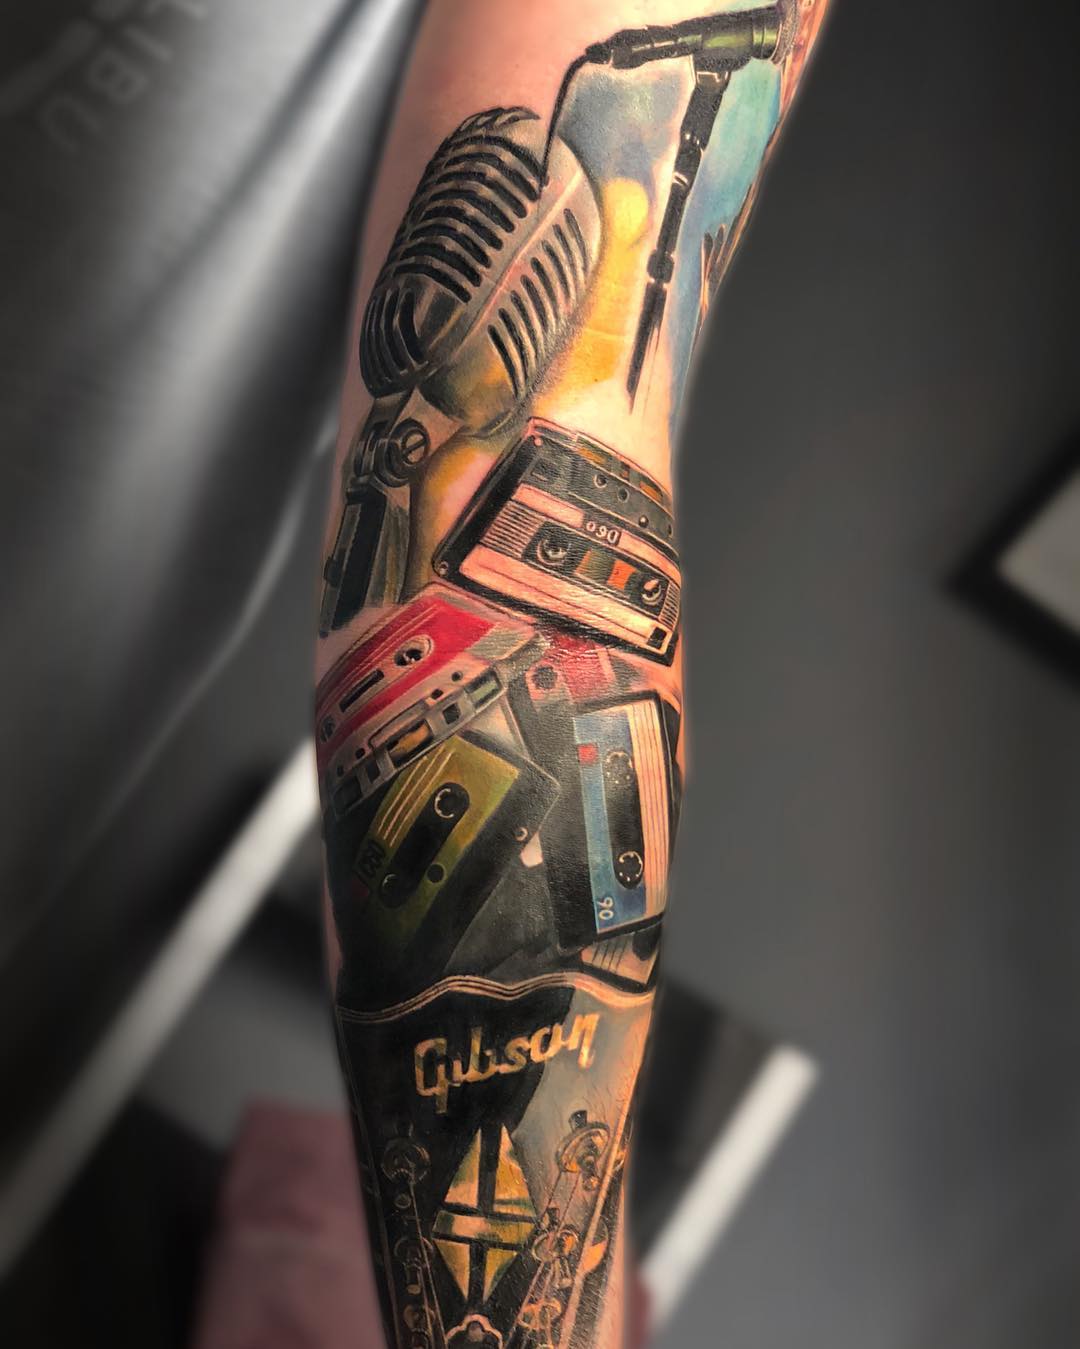 Monumental Ink on X: "Music sleeve continuation done by Aggie @MonumentalInk https://t.co/7HtVnxKxRI #tattoo #tattoos #art #artist #tattooartist #design #love #music #sleeve #microphone #musictattoo #realism #realistic #colchester #essex https://t.co ...